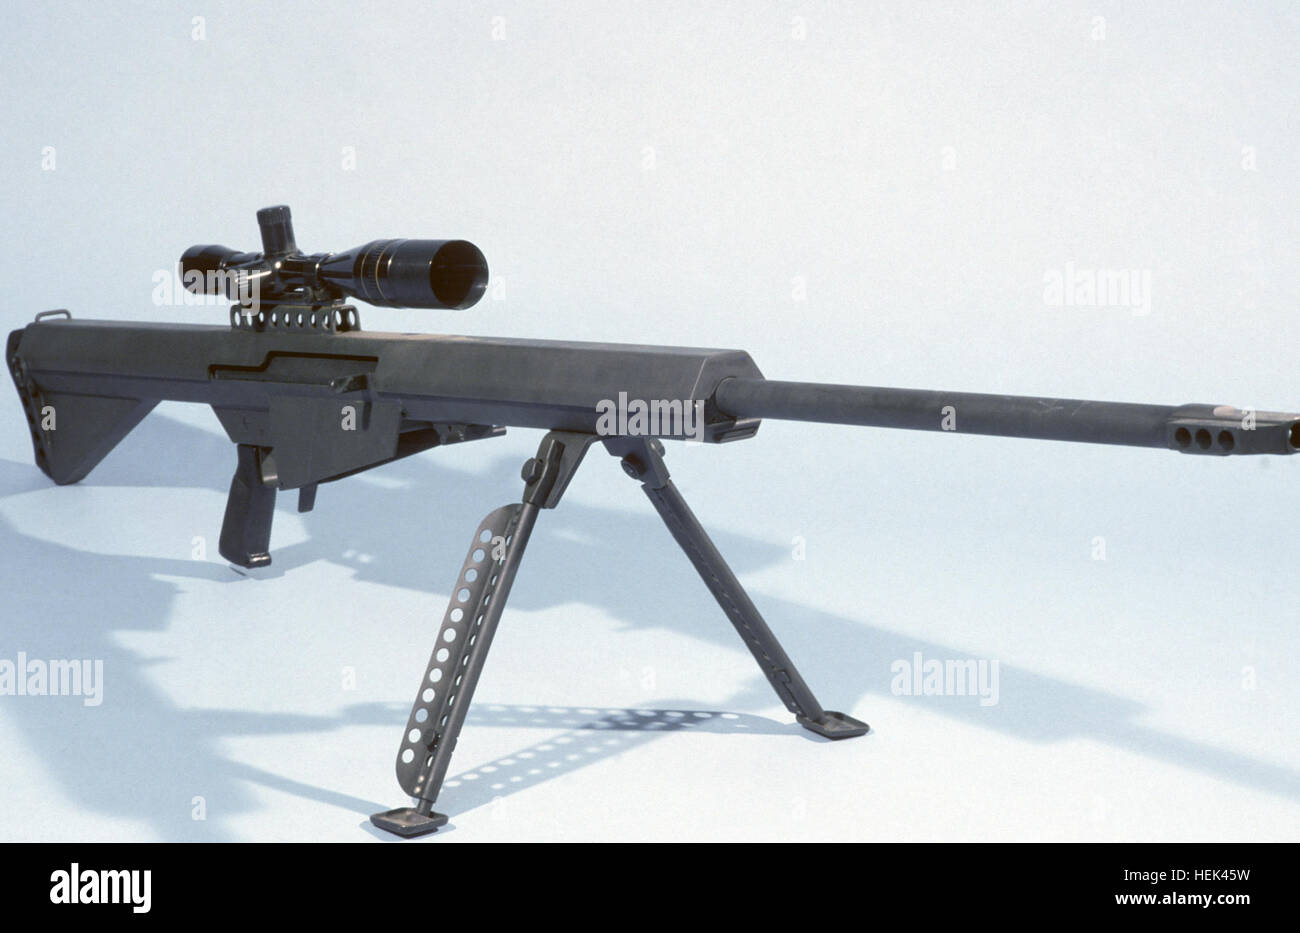 You Can Buy a .50 Caliber Sniper Rifle Online